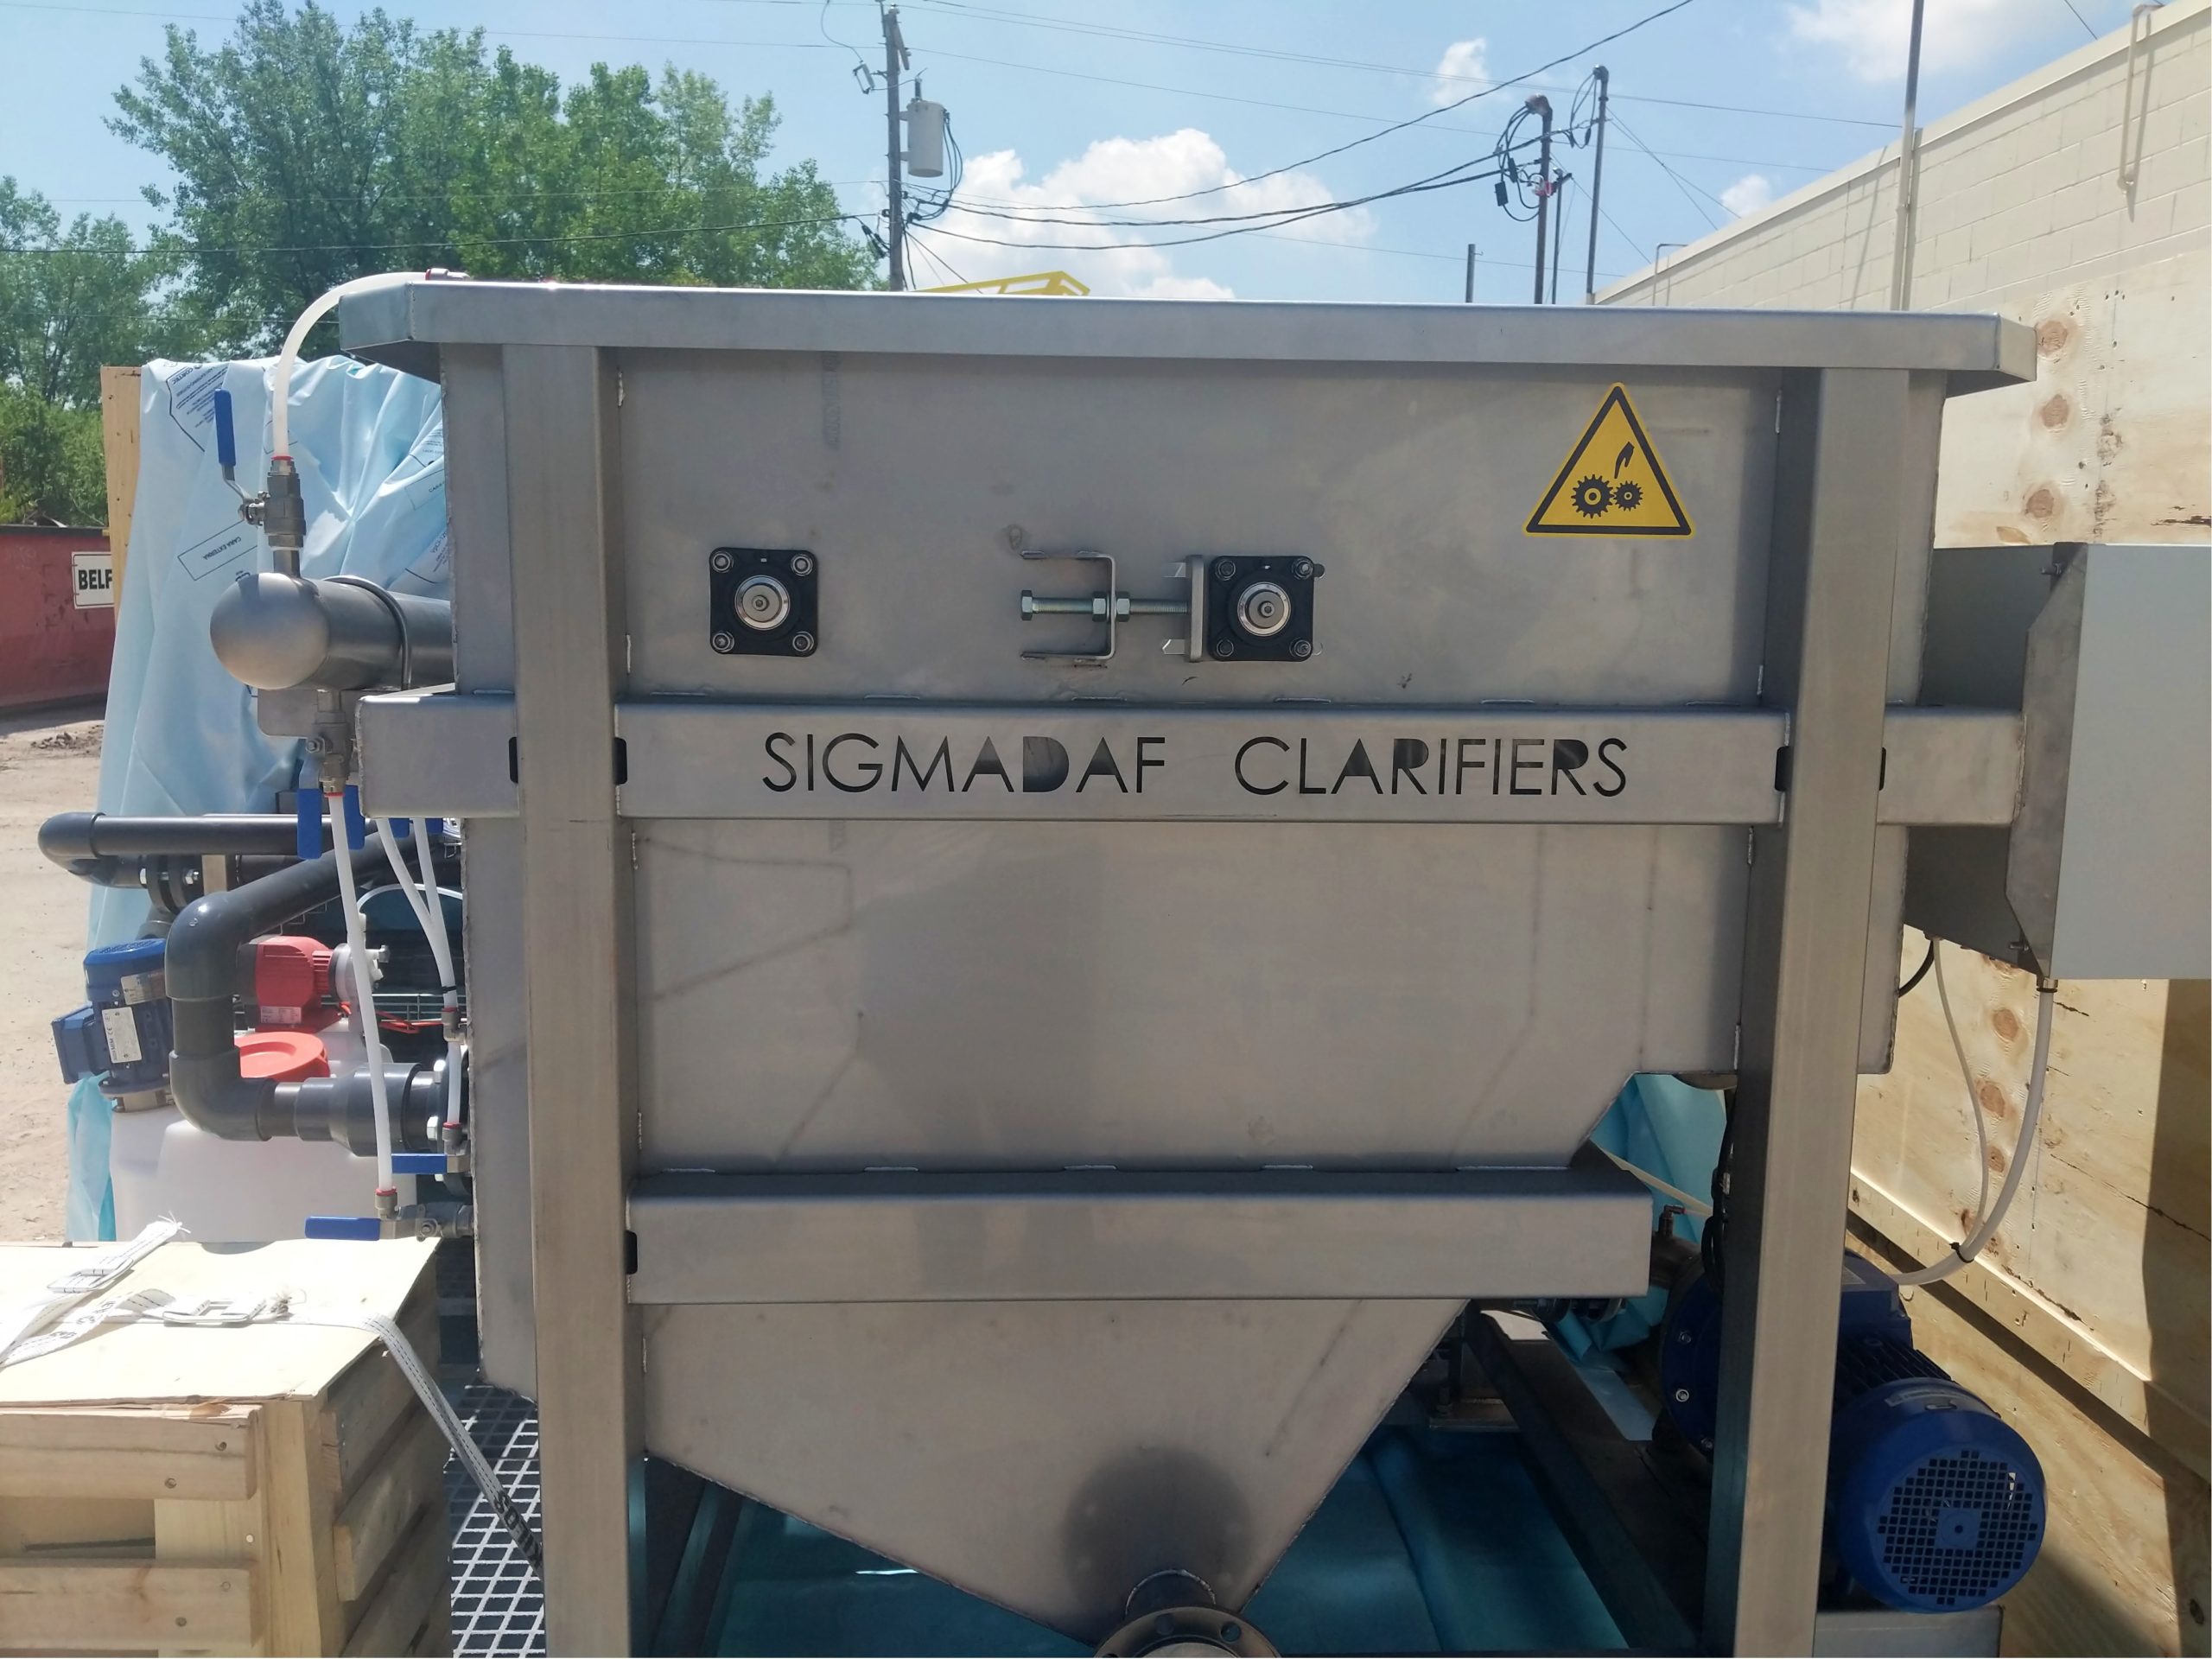 A large stainless steel tank pictured outside with SigmaDAF Clarifiers stamped into it.